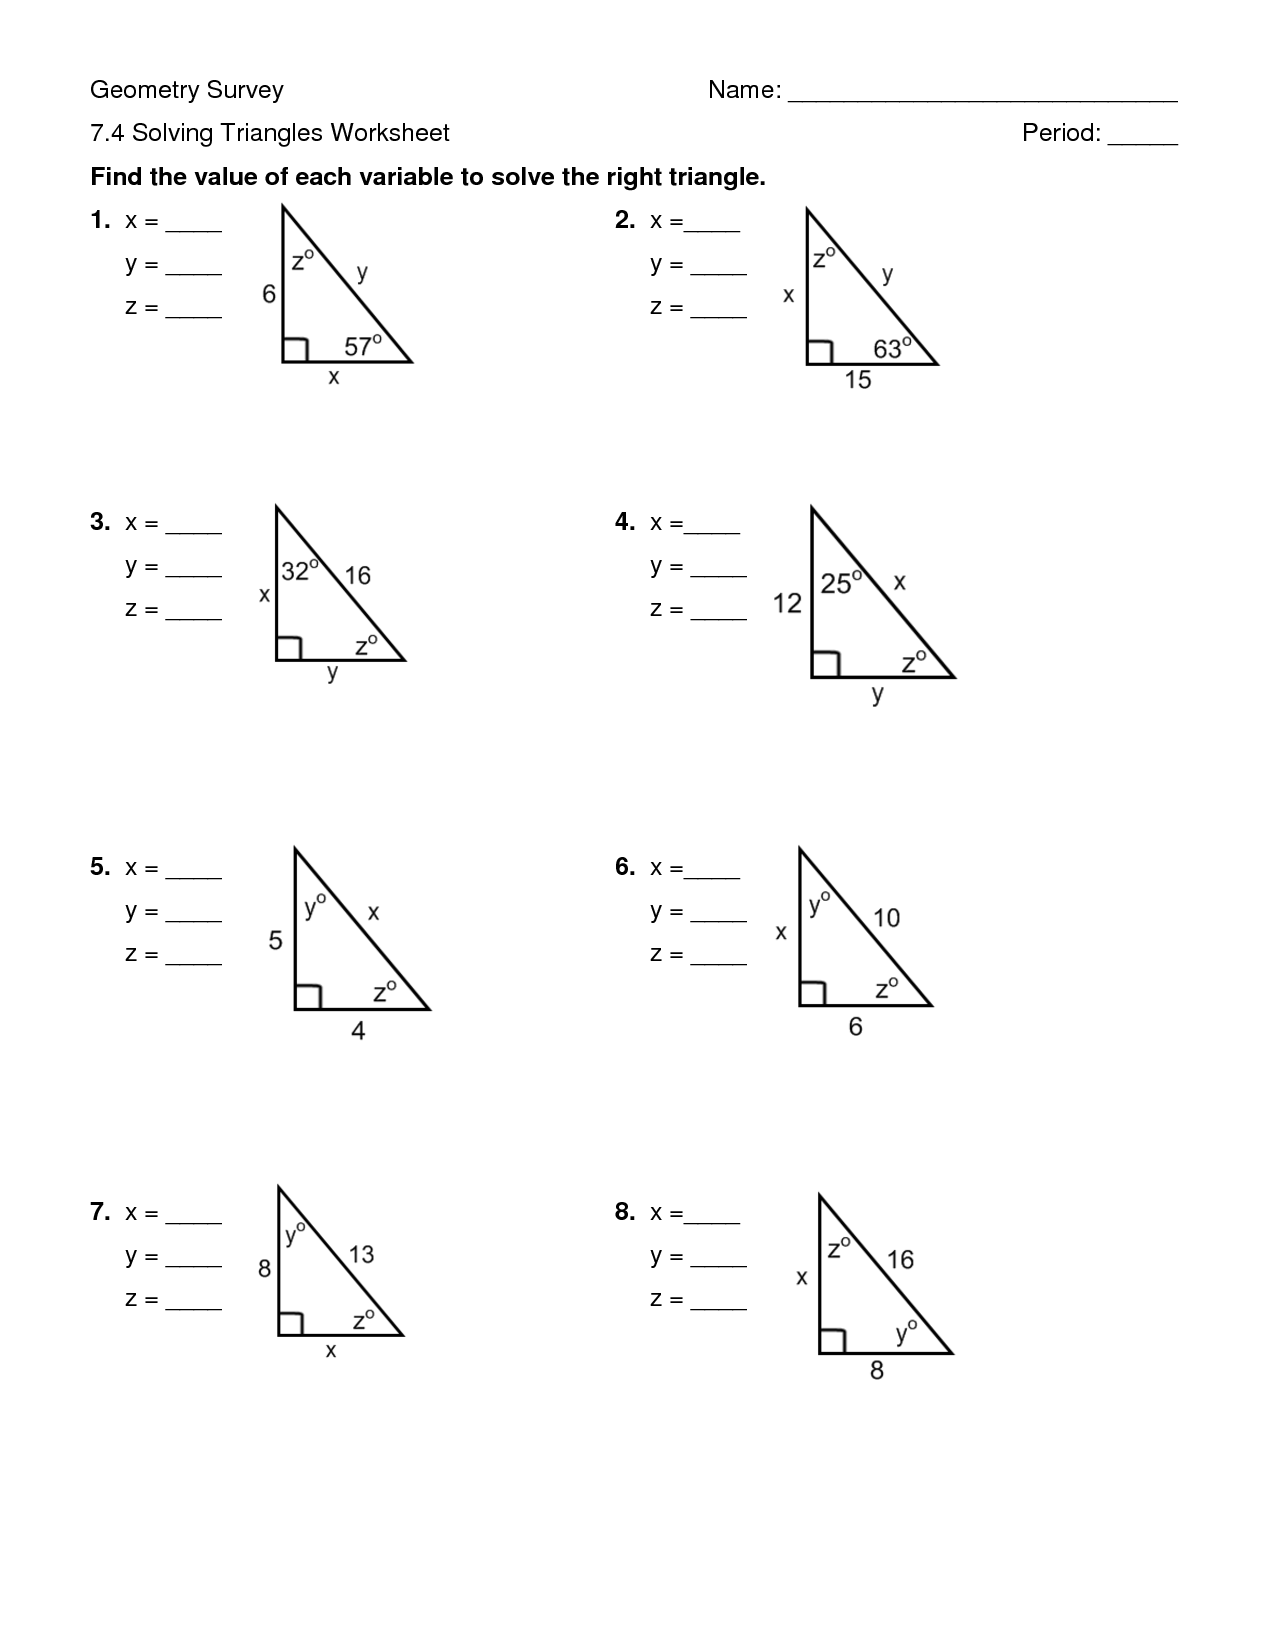 trigonometric-ratios-in-right-triangles-answers-18-best-images-of-trigonometry-worksheets-and